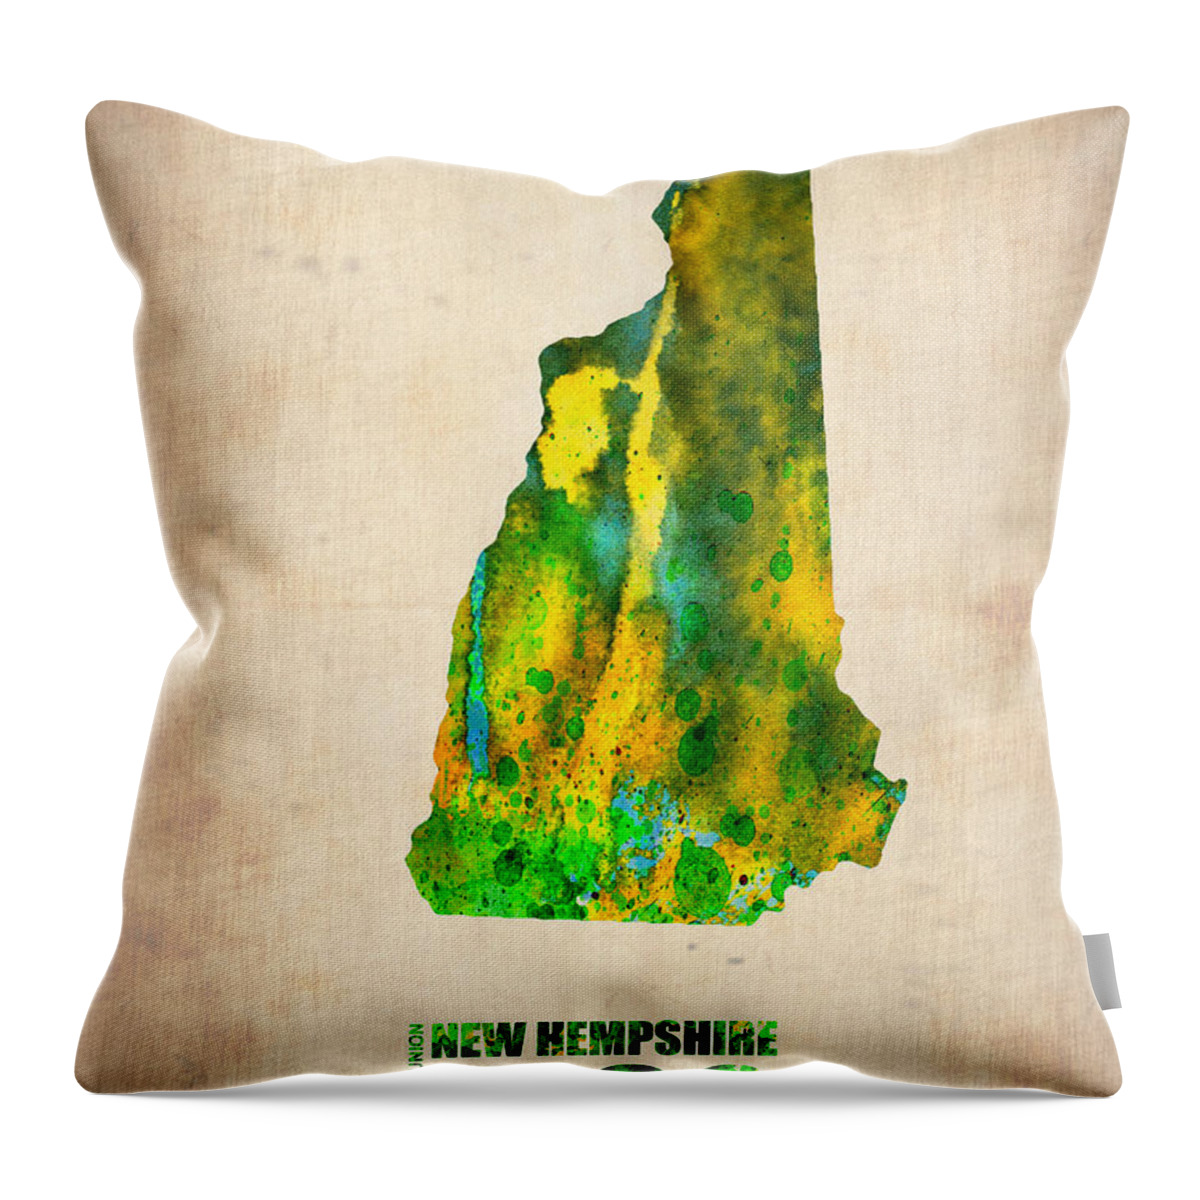 New Hampshire Throw Pillow featuring the painting New Hampshire Watercolor Map by Naxart Studio